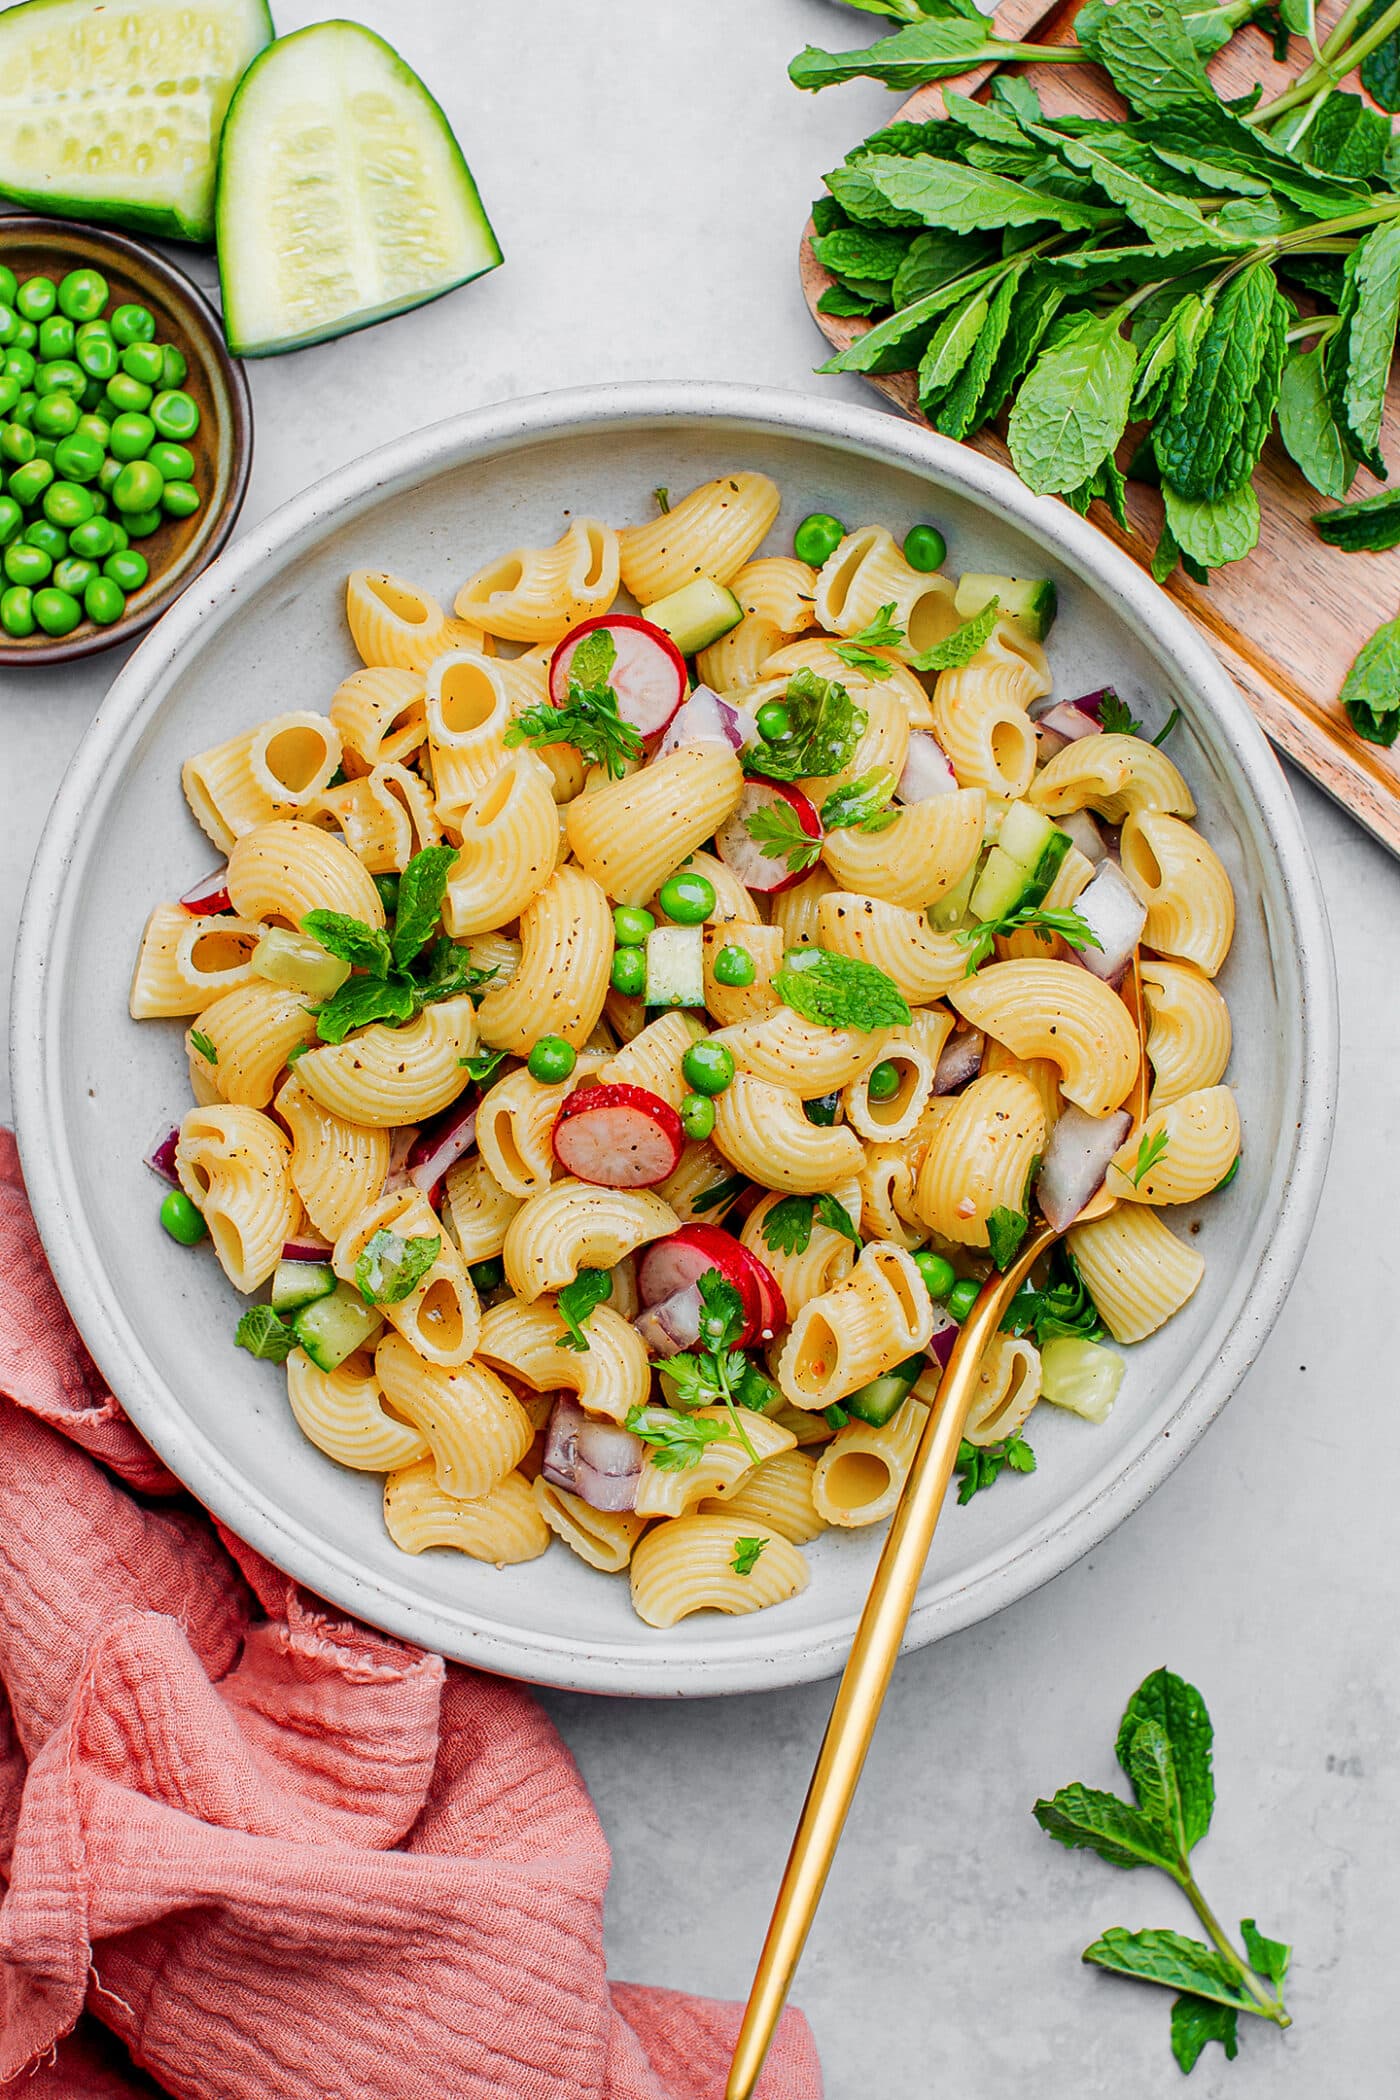 Macaroni salad with green peas, radishes, mint, and cucumber.